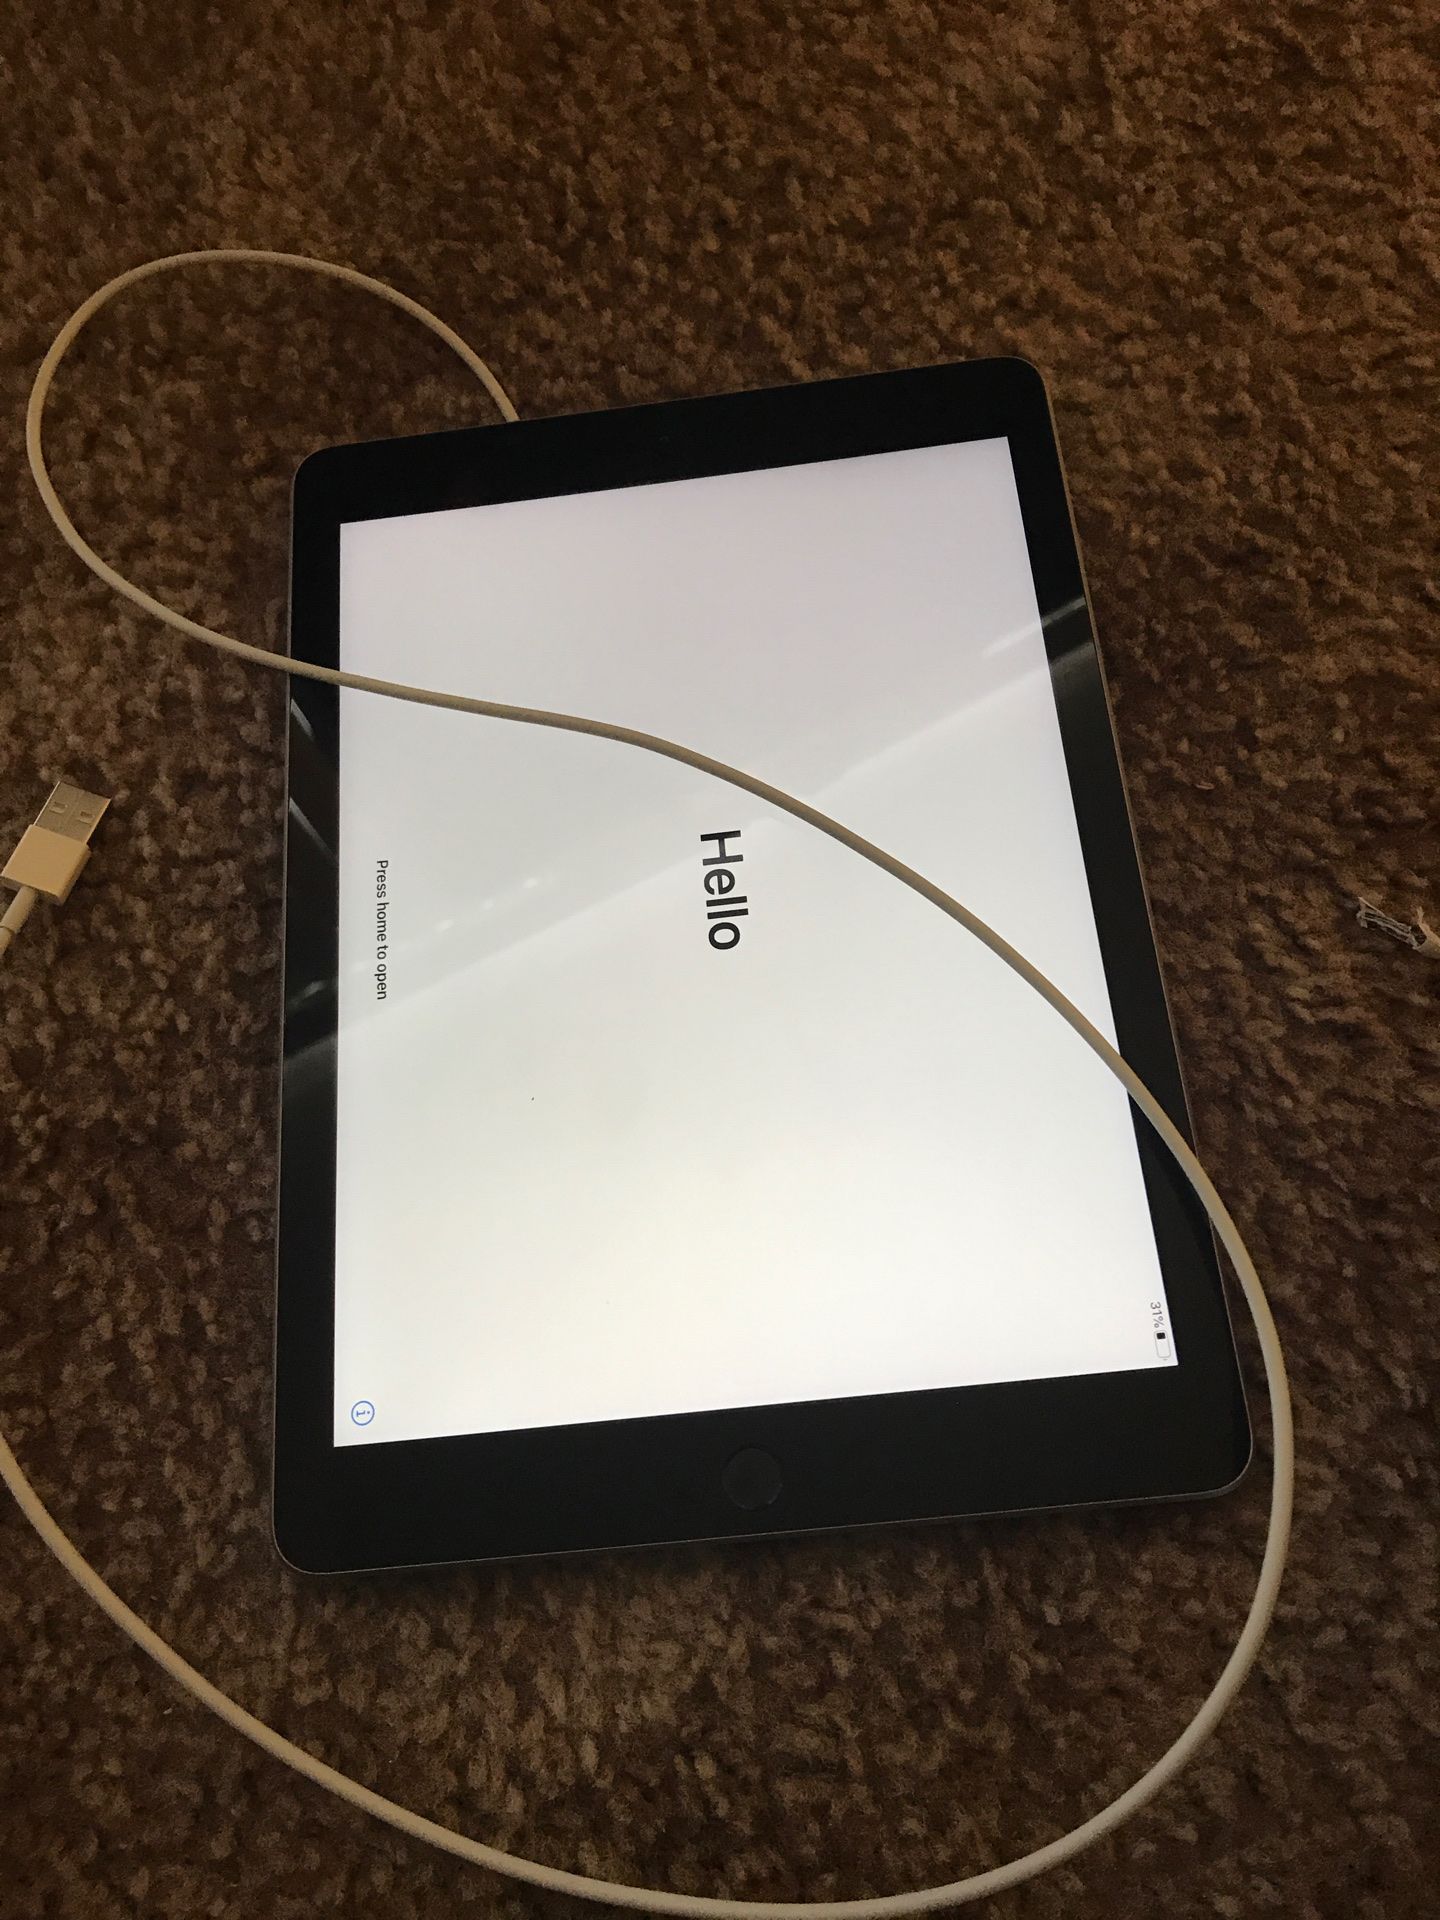 6th Gen. IPad w/ Charger